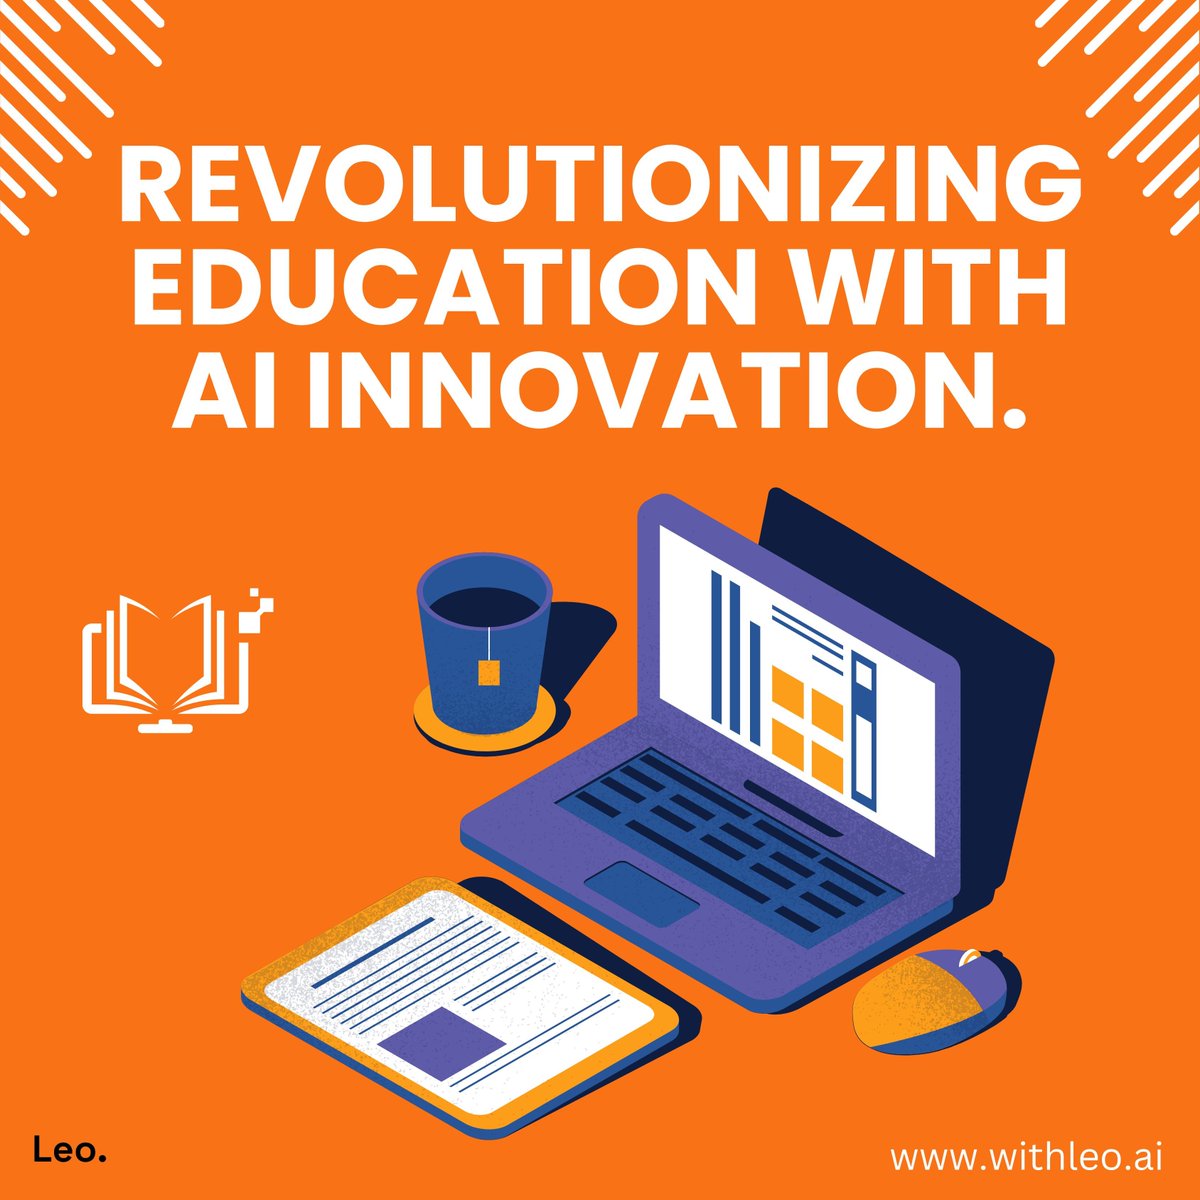 Transform education with Leo, an AI-driven platform that automates grading, creates dynamic problem sets, and offers instant feedback. Elevate learning at buff.ly/4brq6EO #AI #edtech #education #teaching #AIinEducation #TeacherTools #TeachingAssistants #EducationalAI